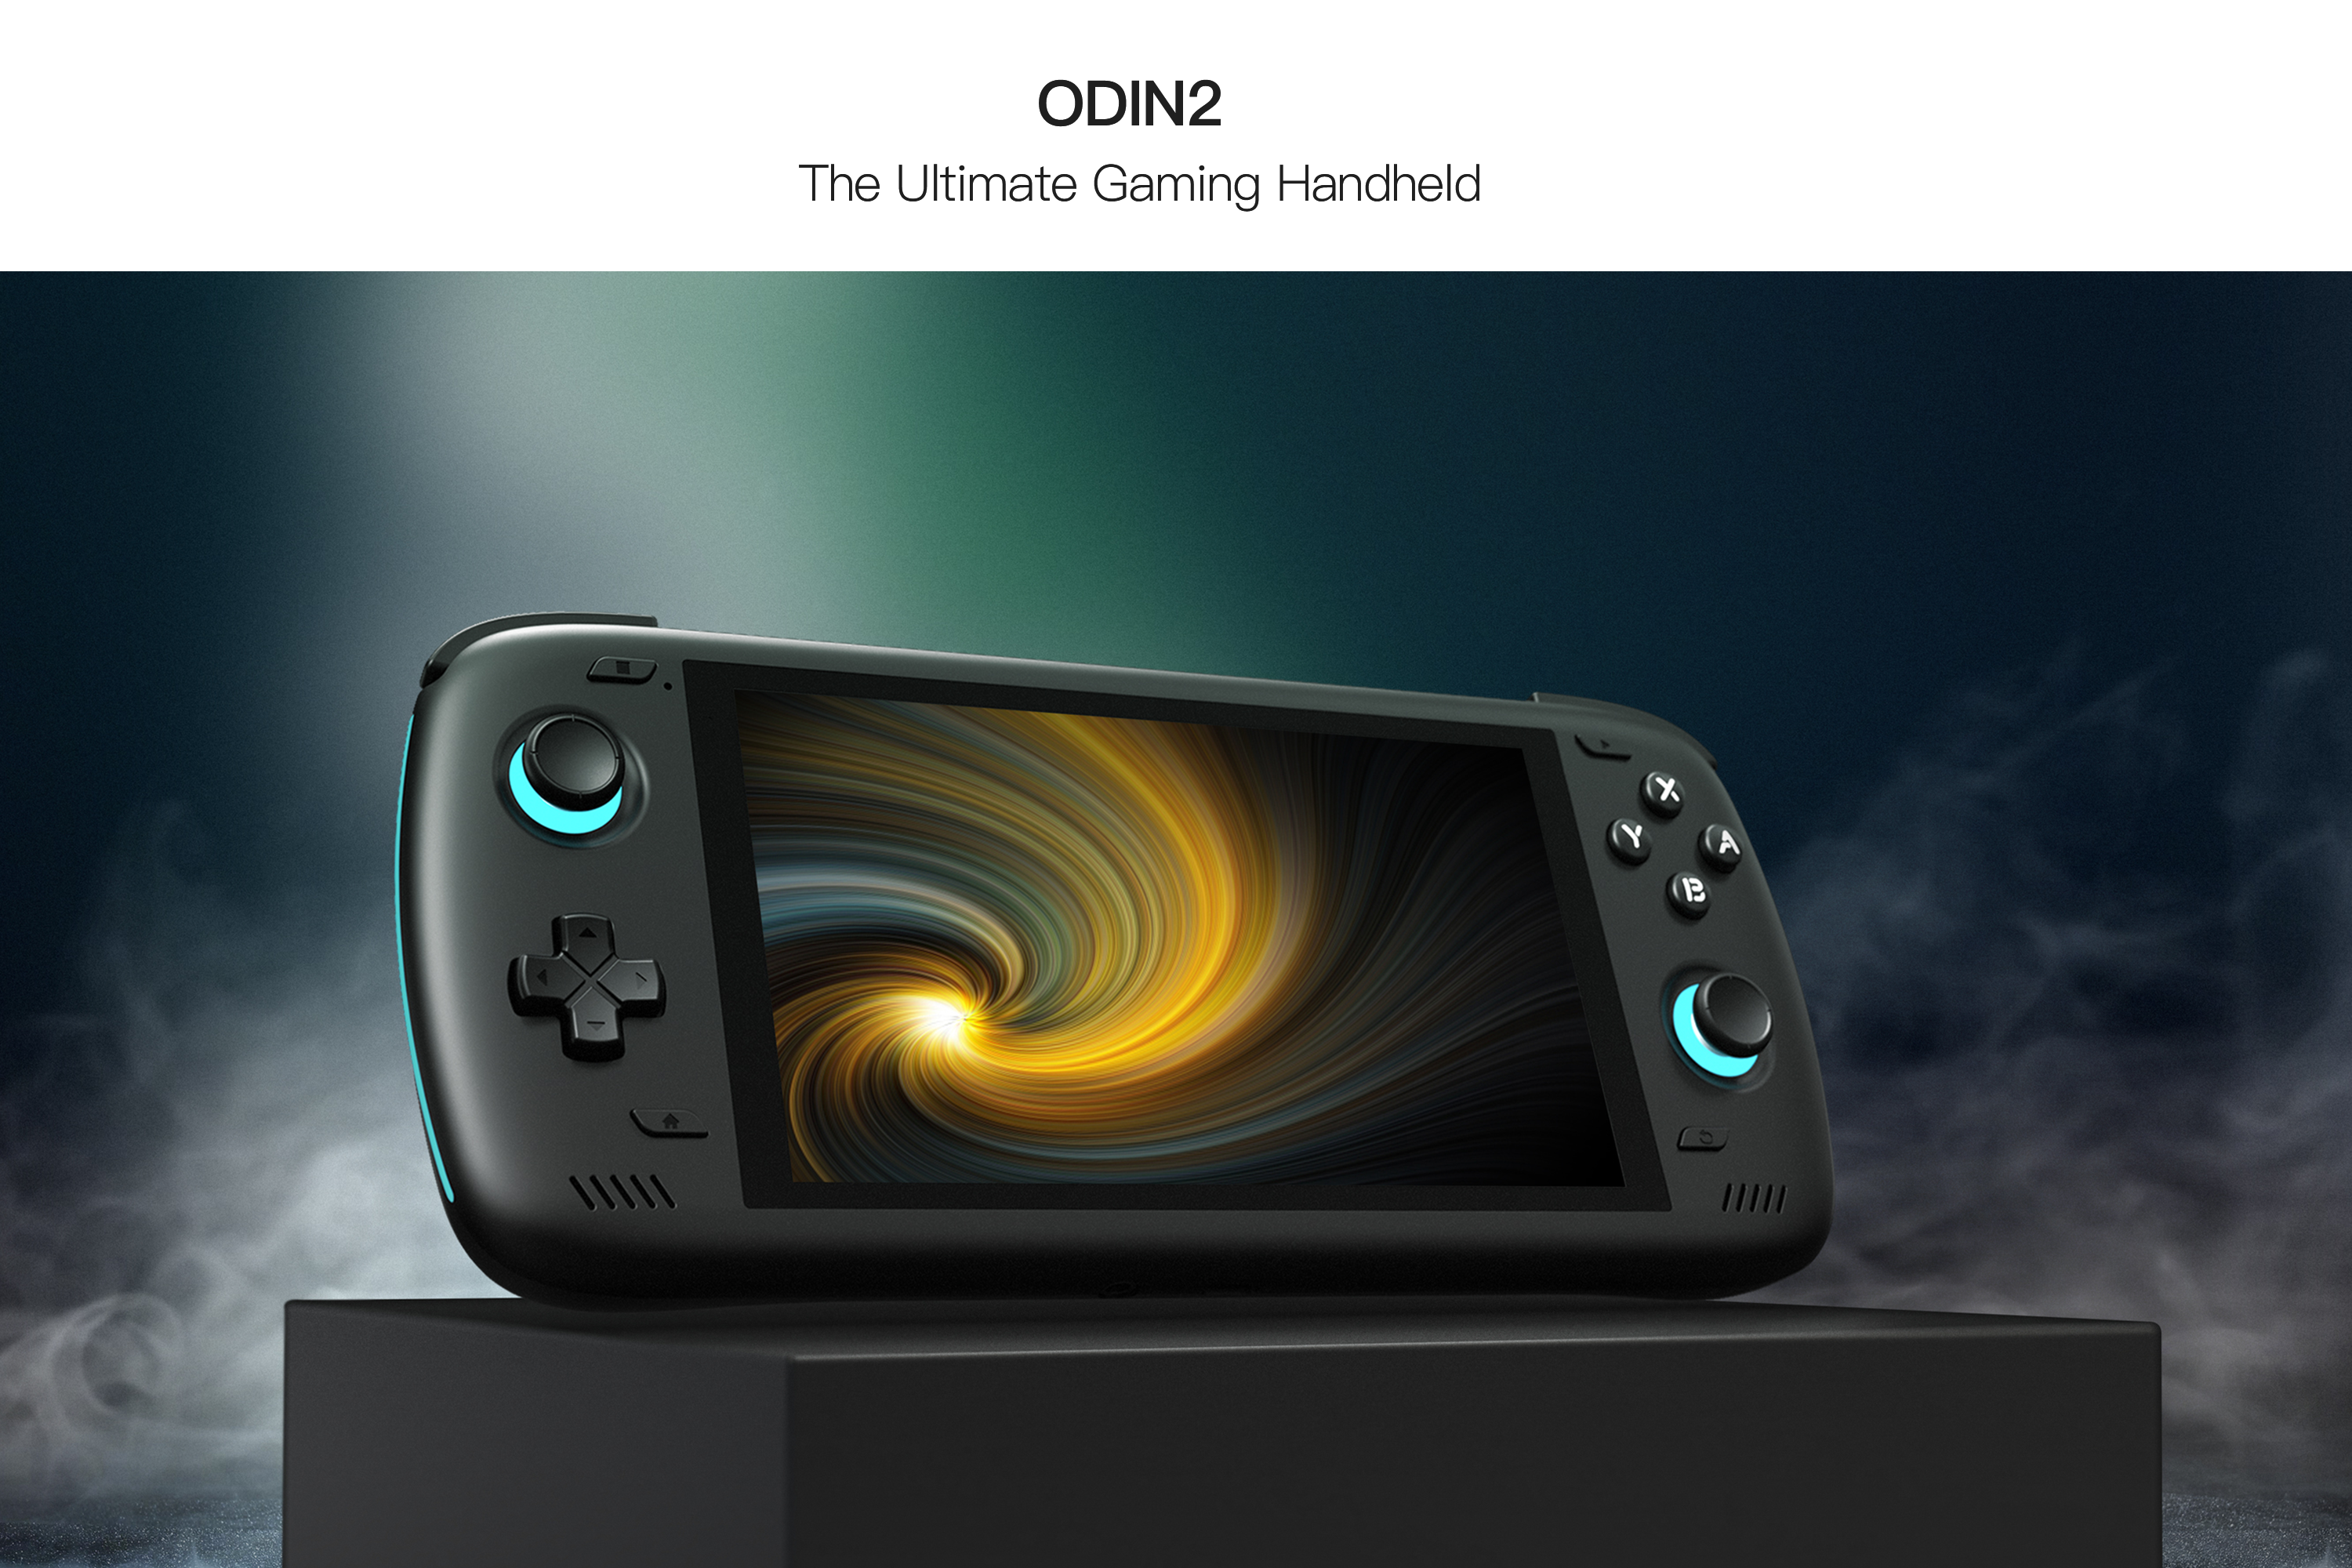 AYN Unveils Odin 2 Gaming Handheld: Powered by Snapdragon 8 Gen 2 SoC, –  Minixpc